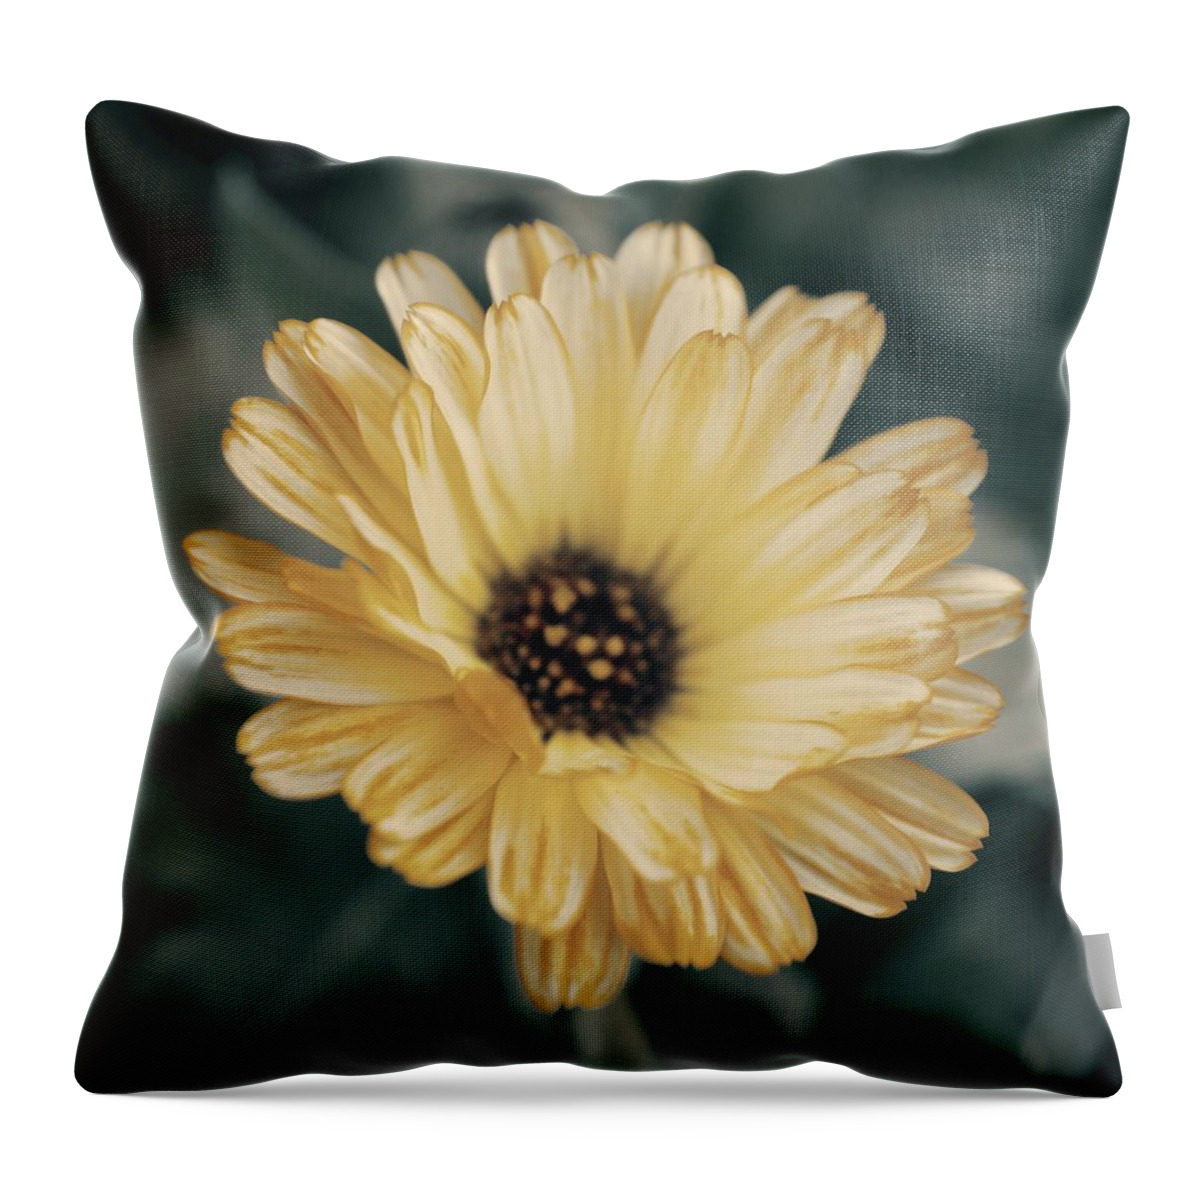 Matt Matekovic Throw Pillow featuring the photograph Late Bloomer by Photographic Arts And Design Studio